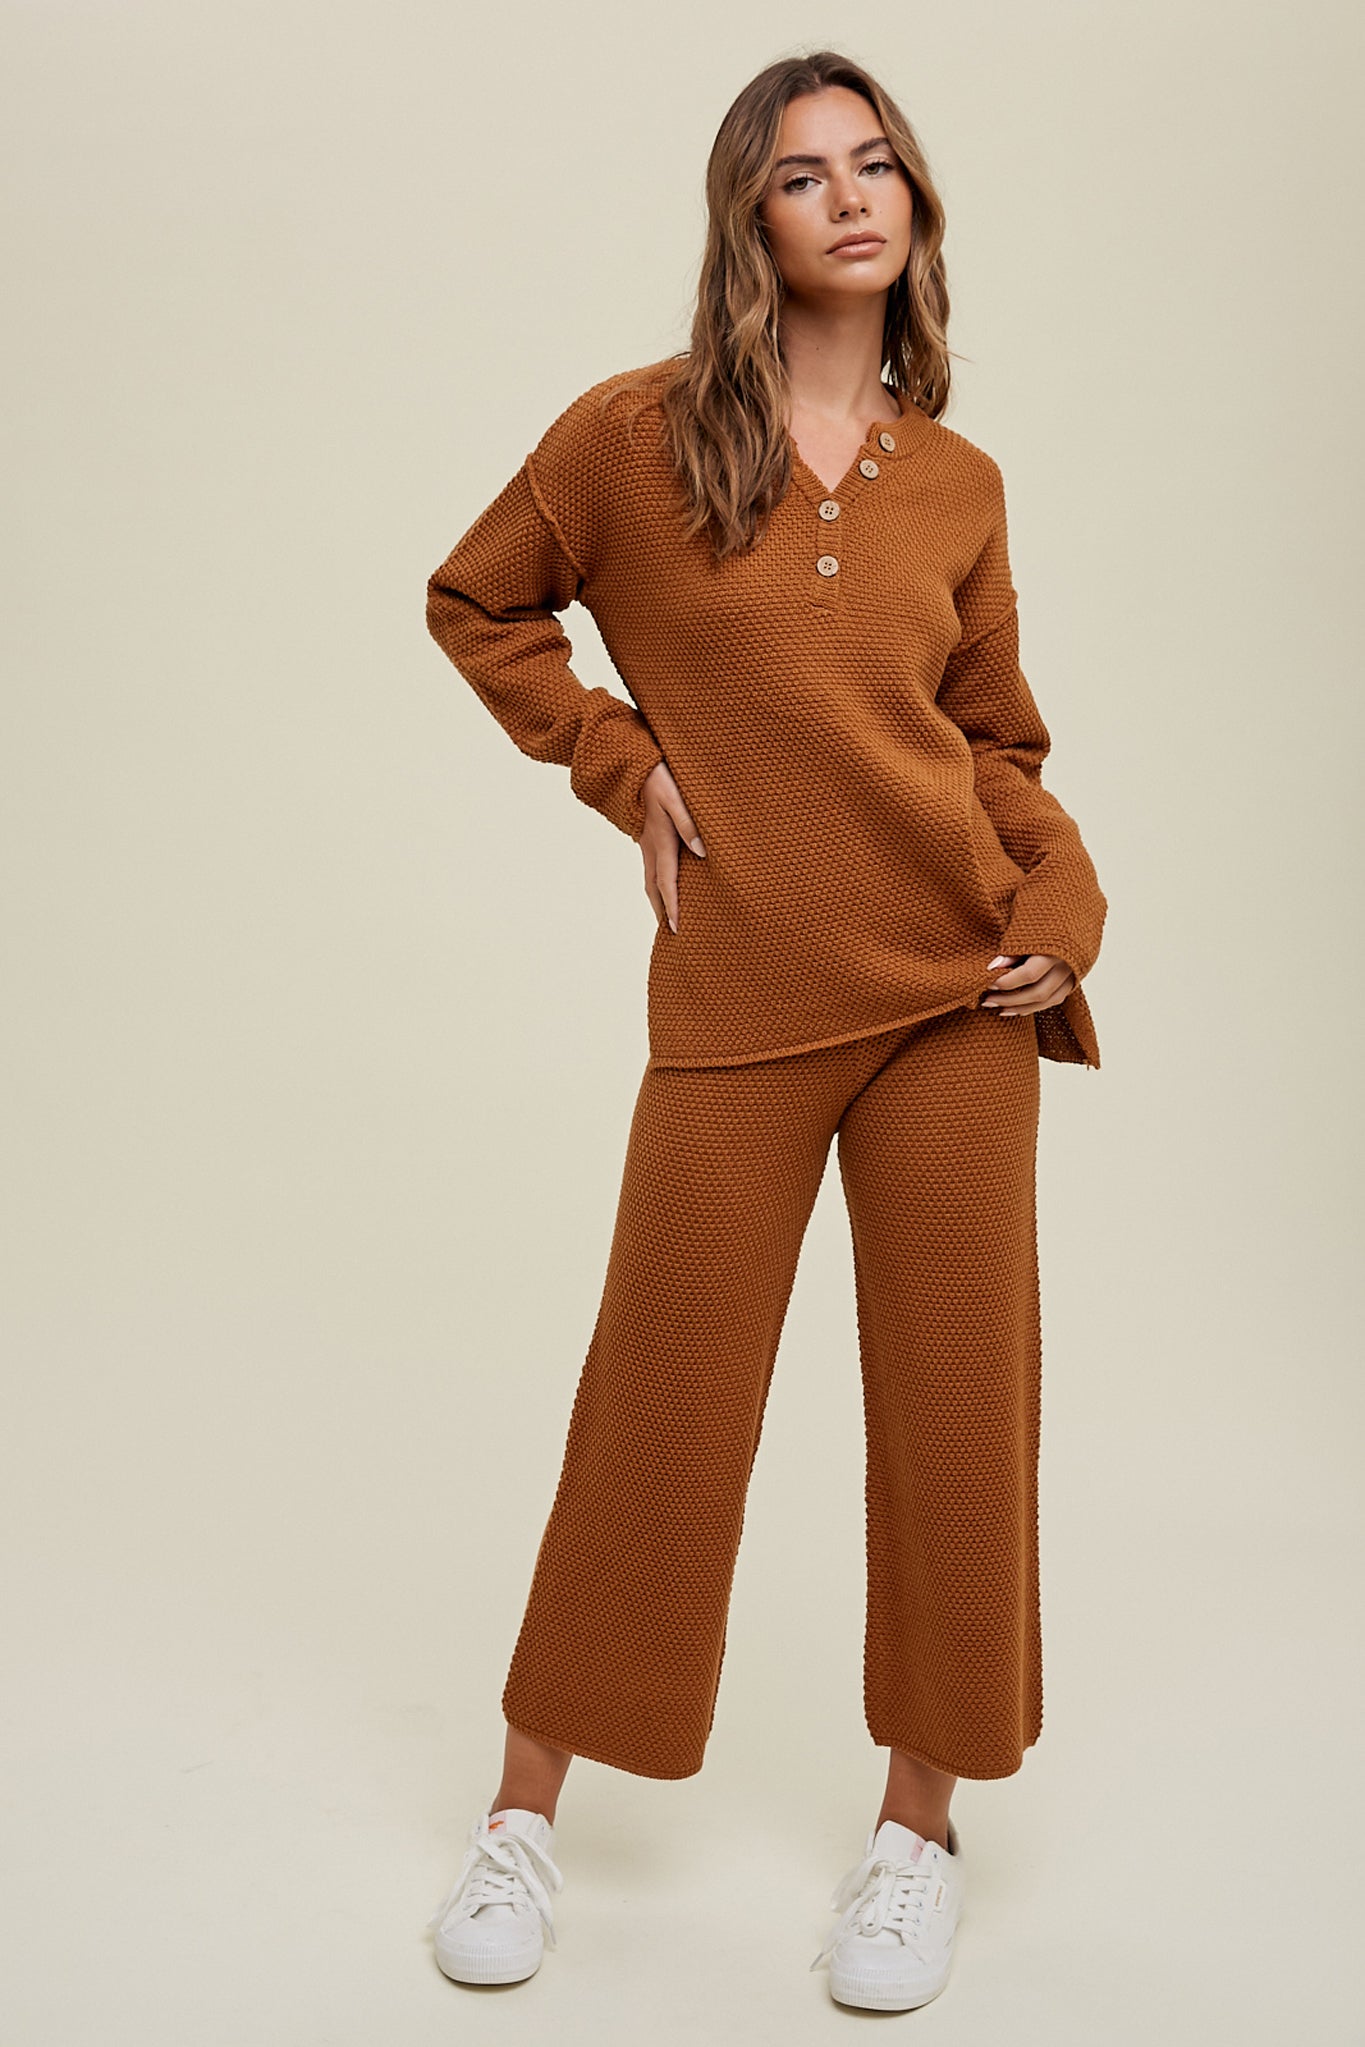 Sandy Plains Sweater Top in Rust